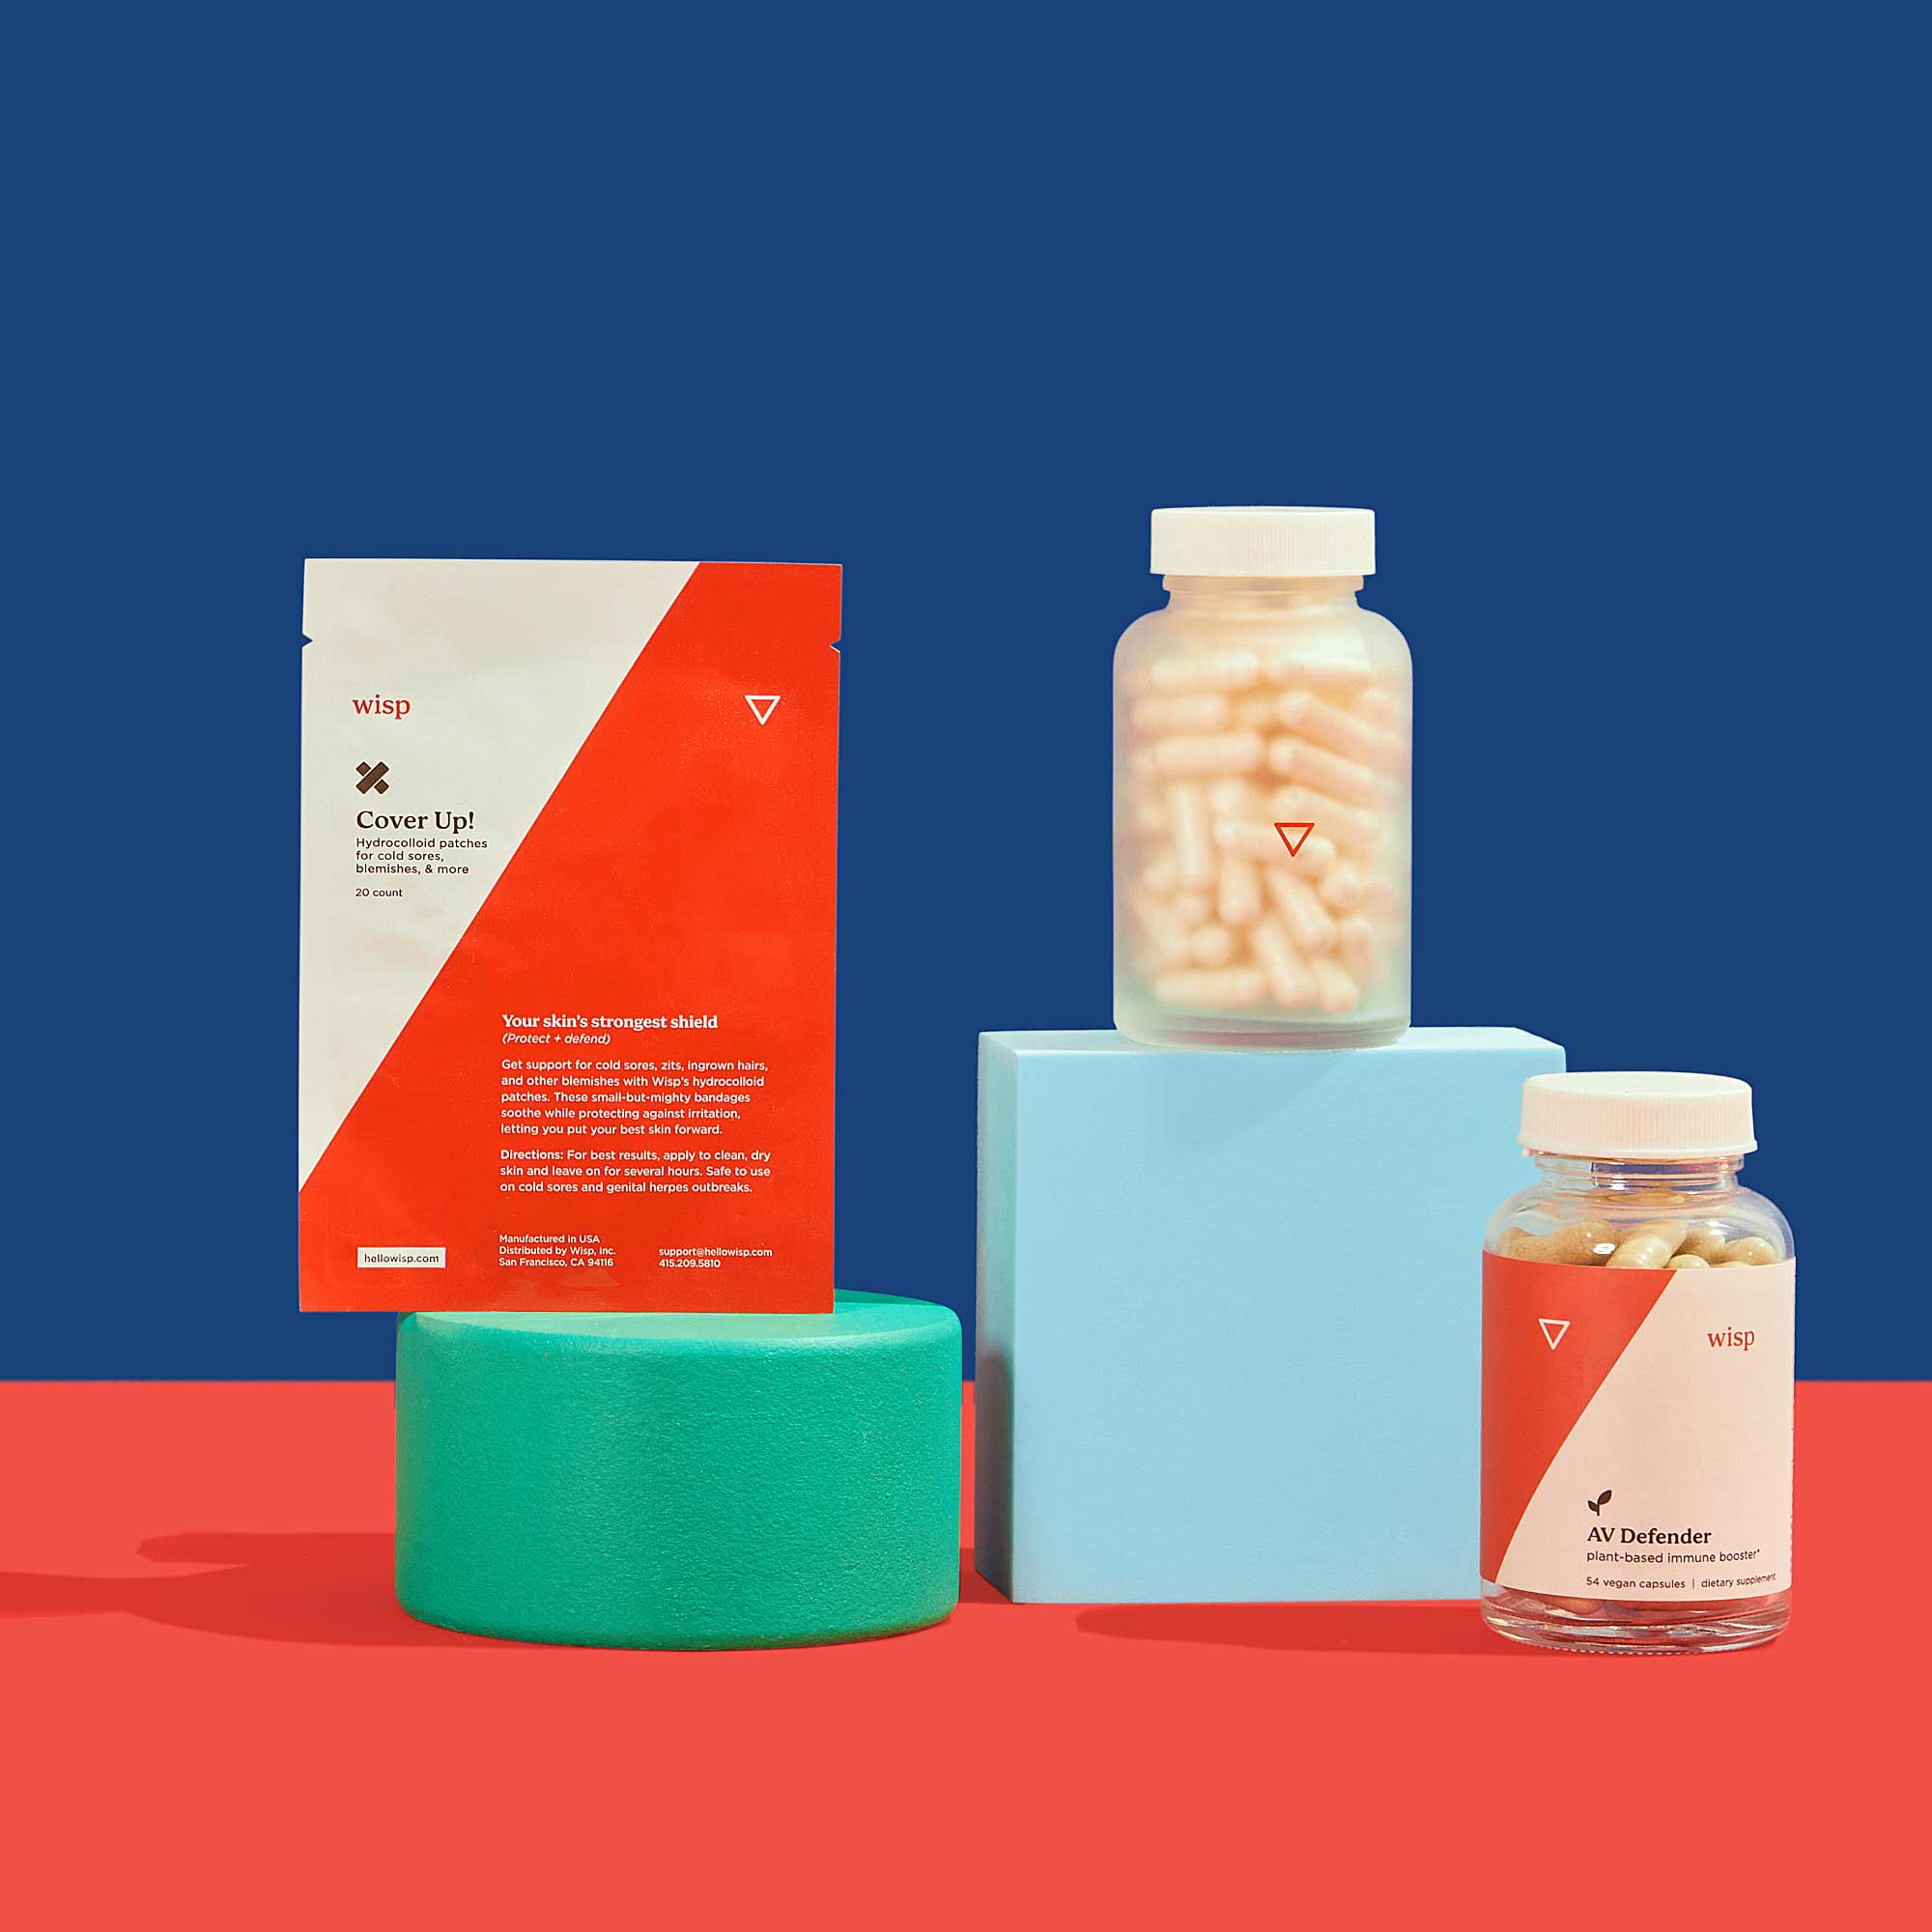 Wisp Cover Up Hydrocolloid Patches, AV Defender, and Lysine balanced on colorful abstract shapes on a red surface with a blue background